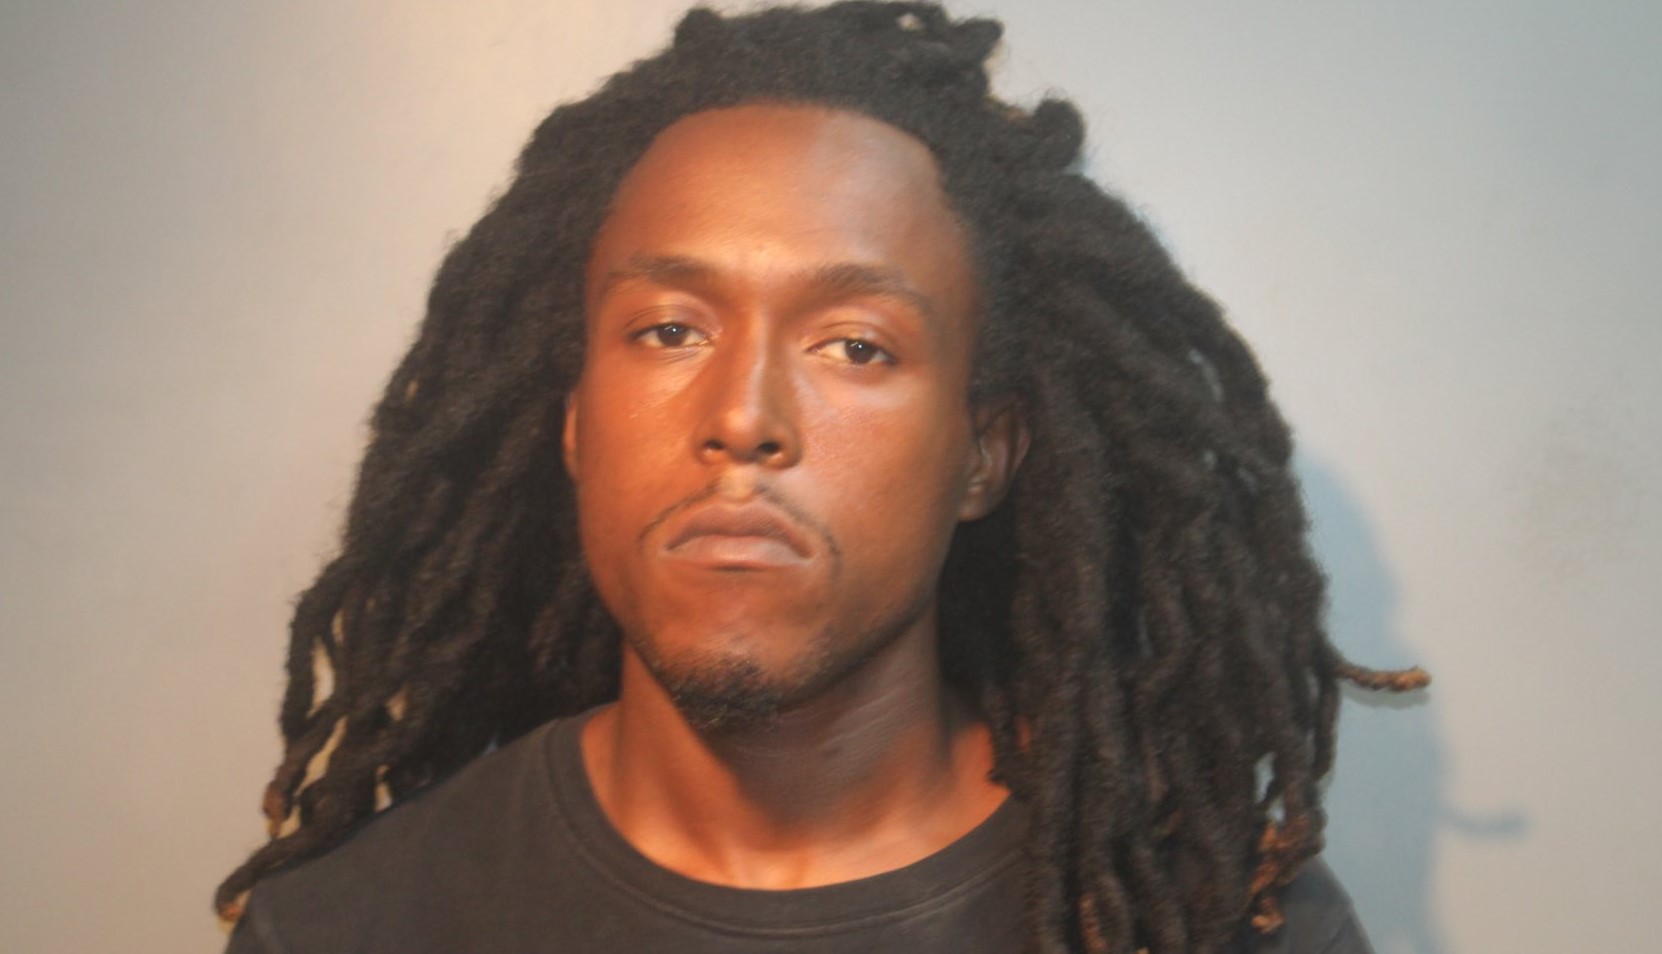 St. Croix Man Arrested By Economic Crimes Unit After Trying To Kite $2,000 Check At Bank